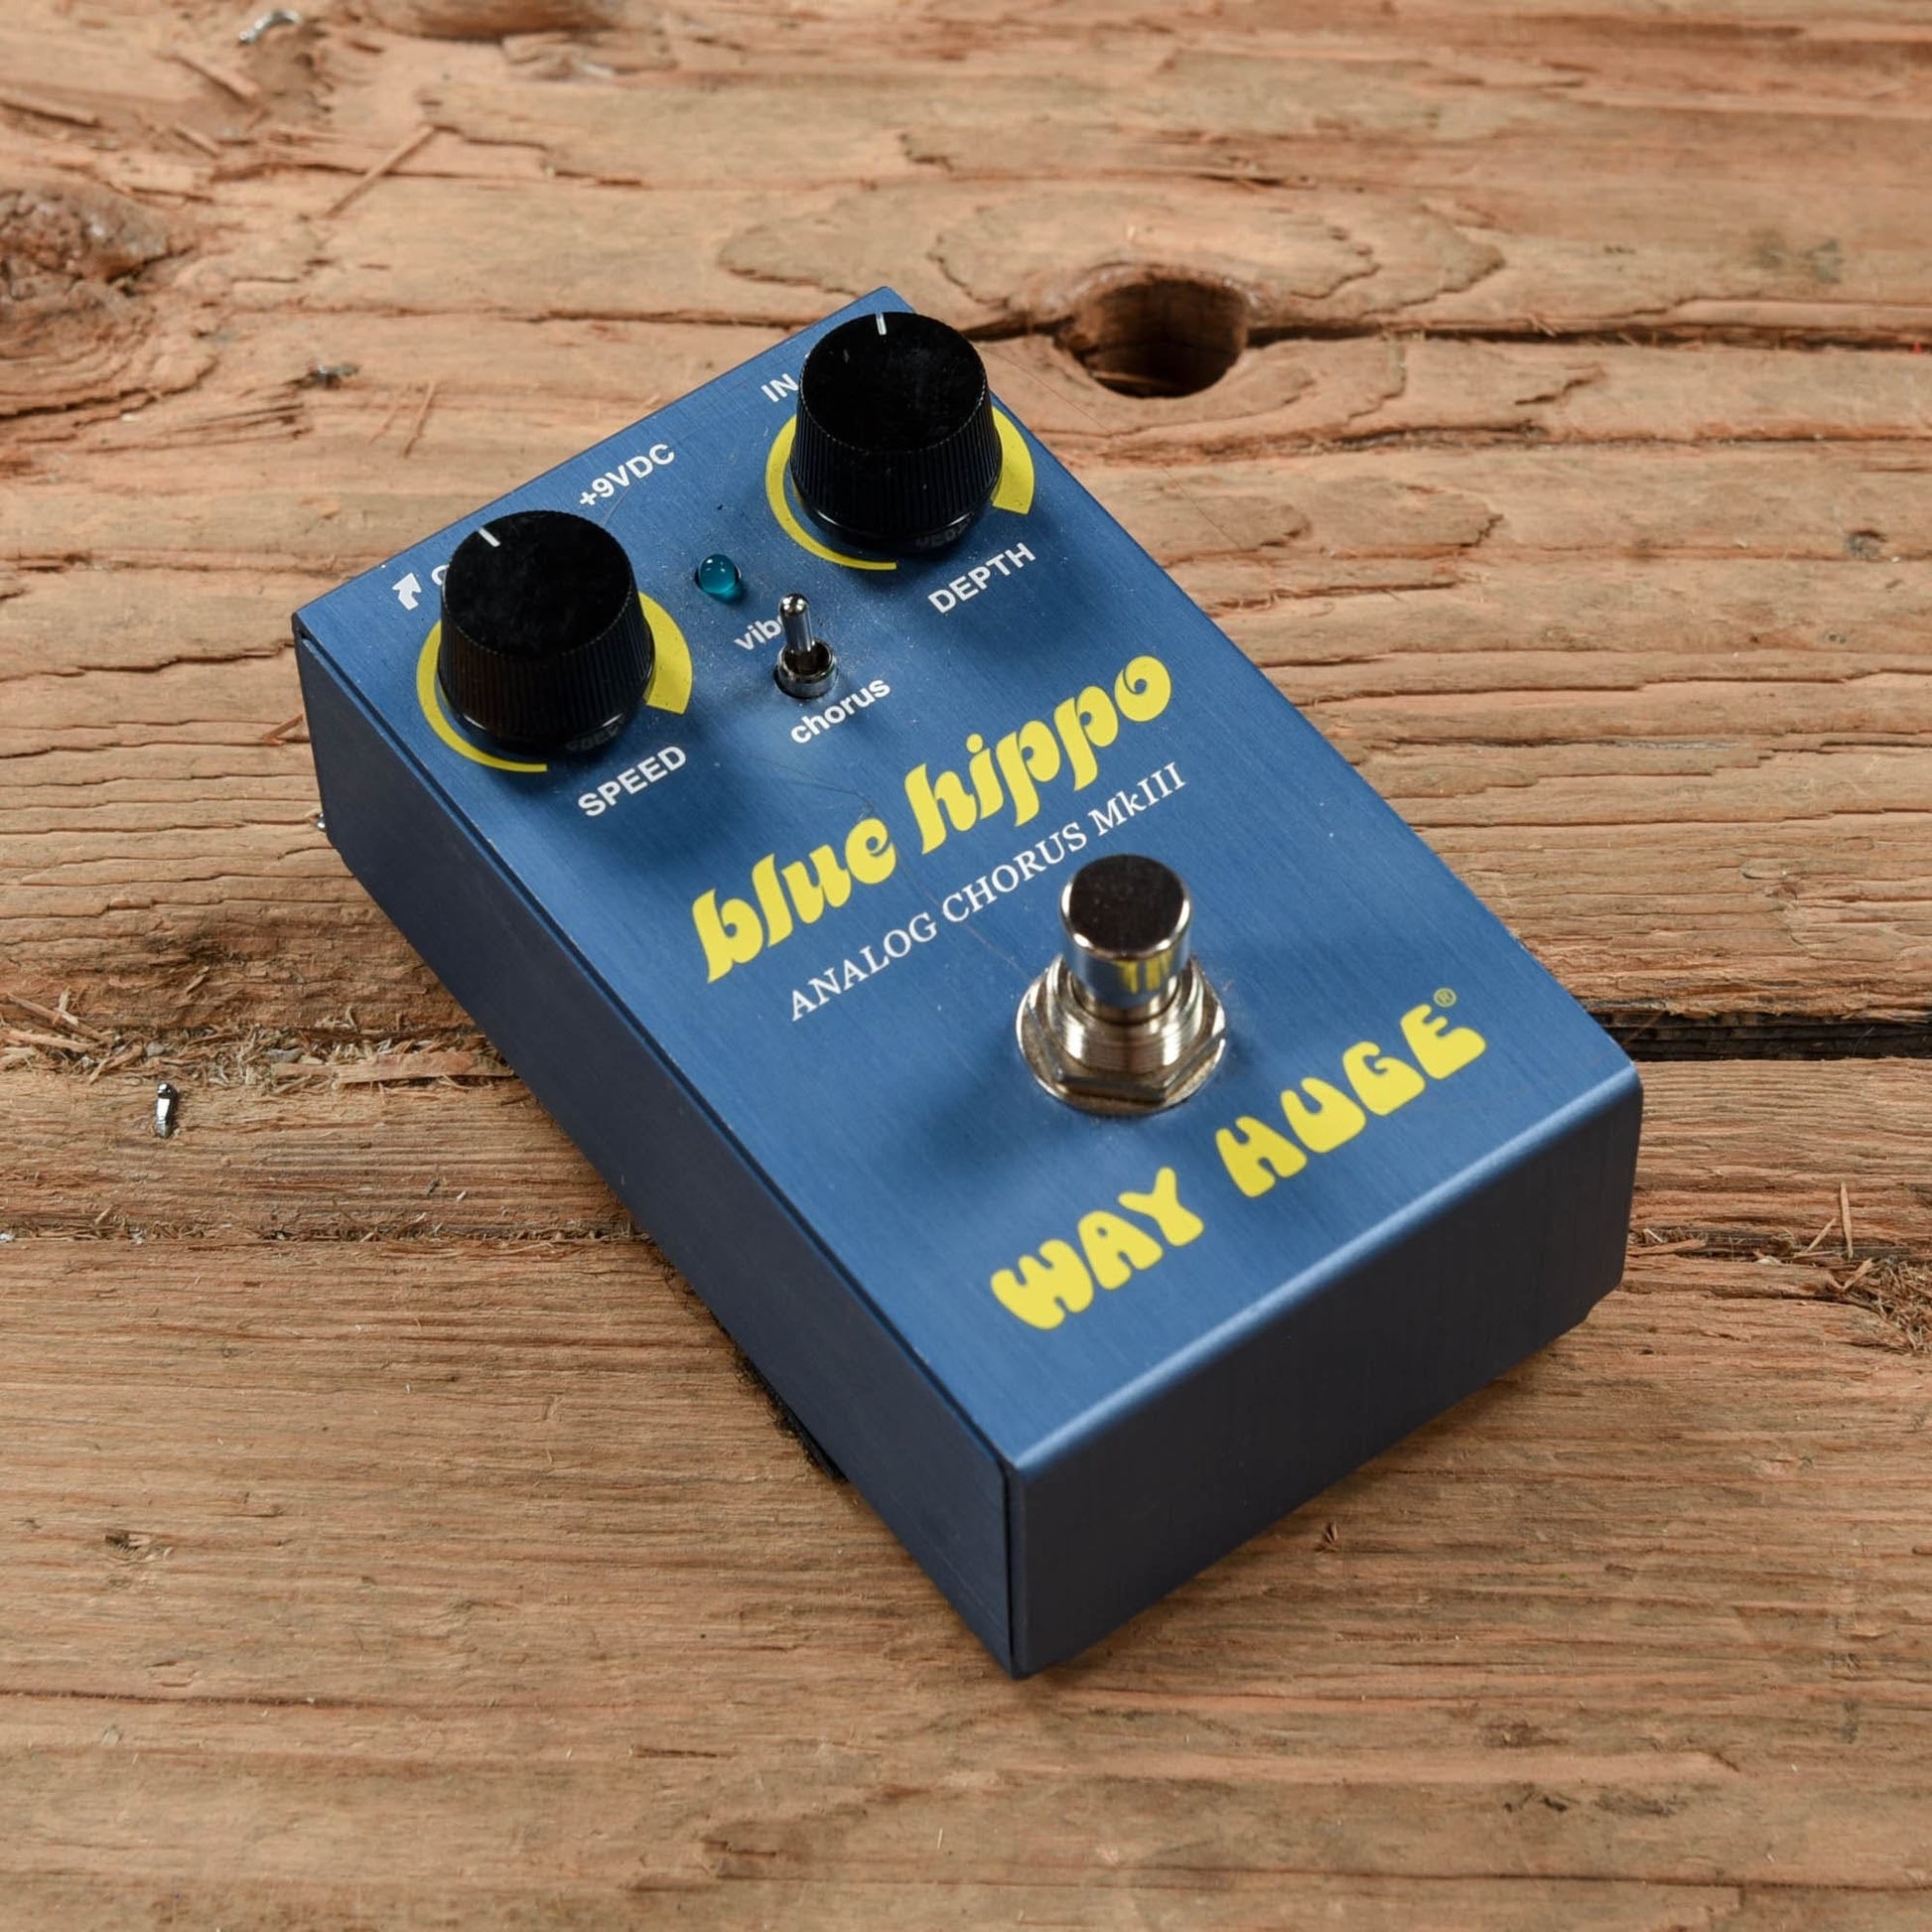 Way Huge Blue Hippo Mk III Effects and Pedals / Chorus and Vibrato